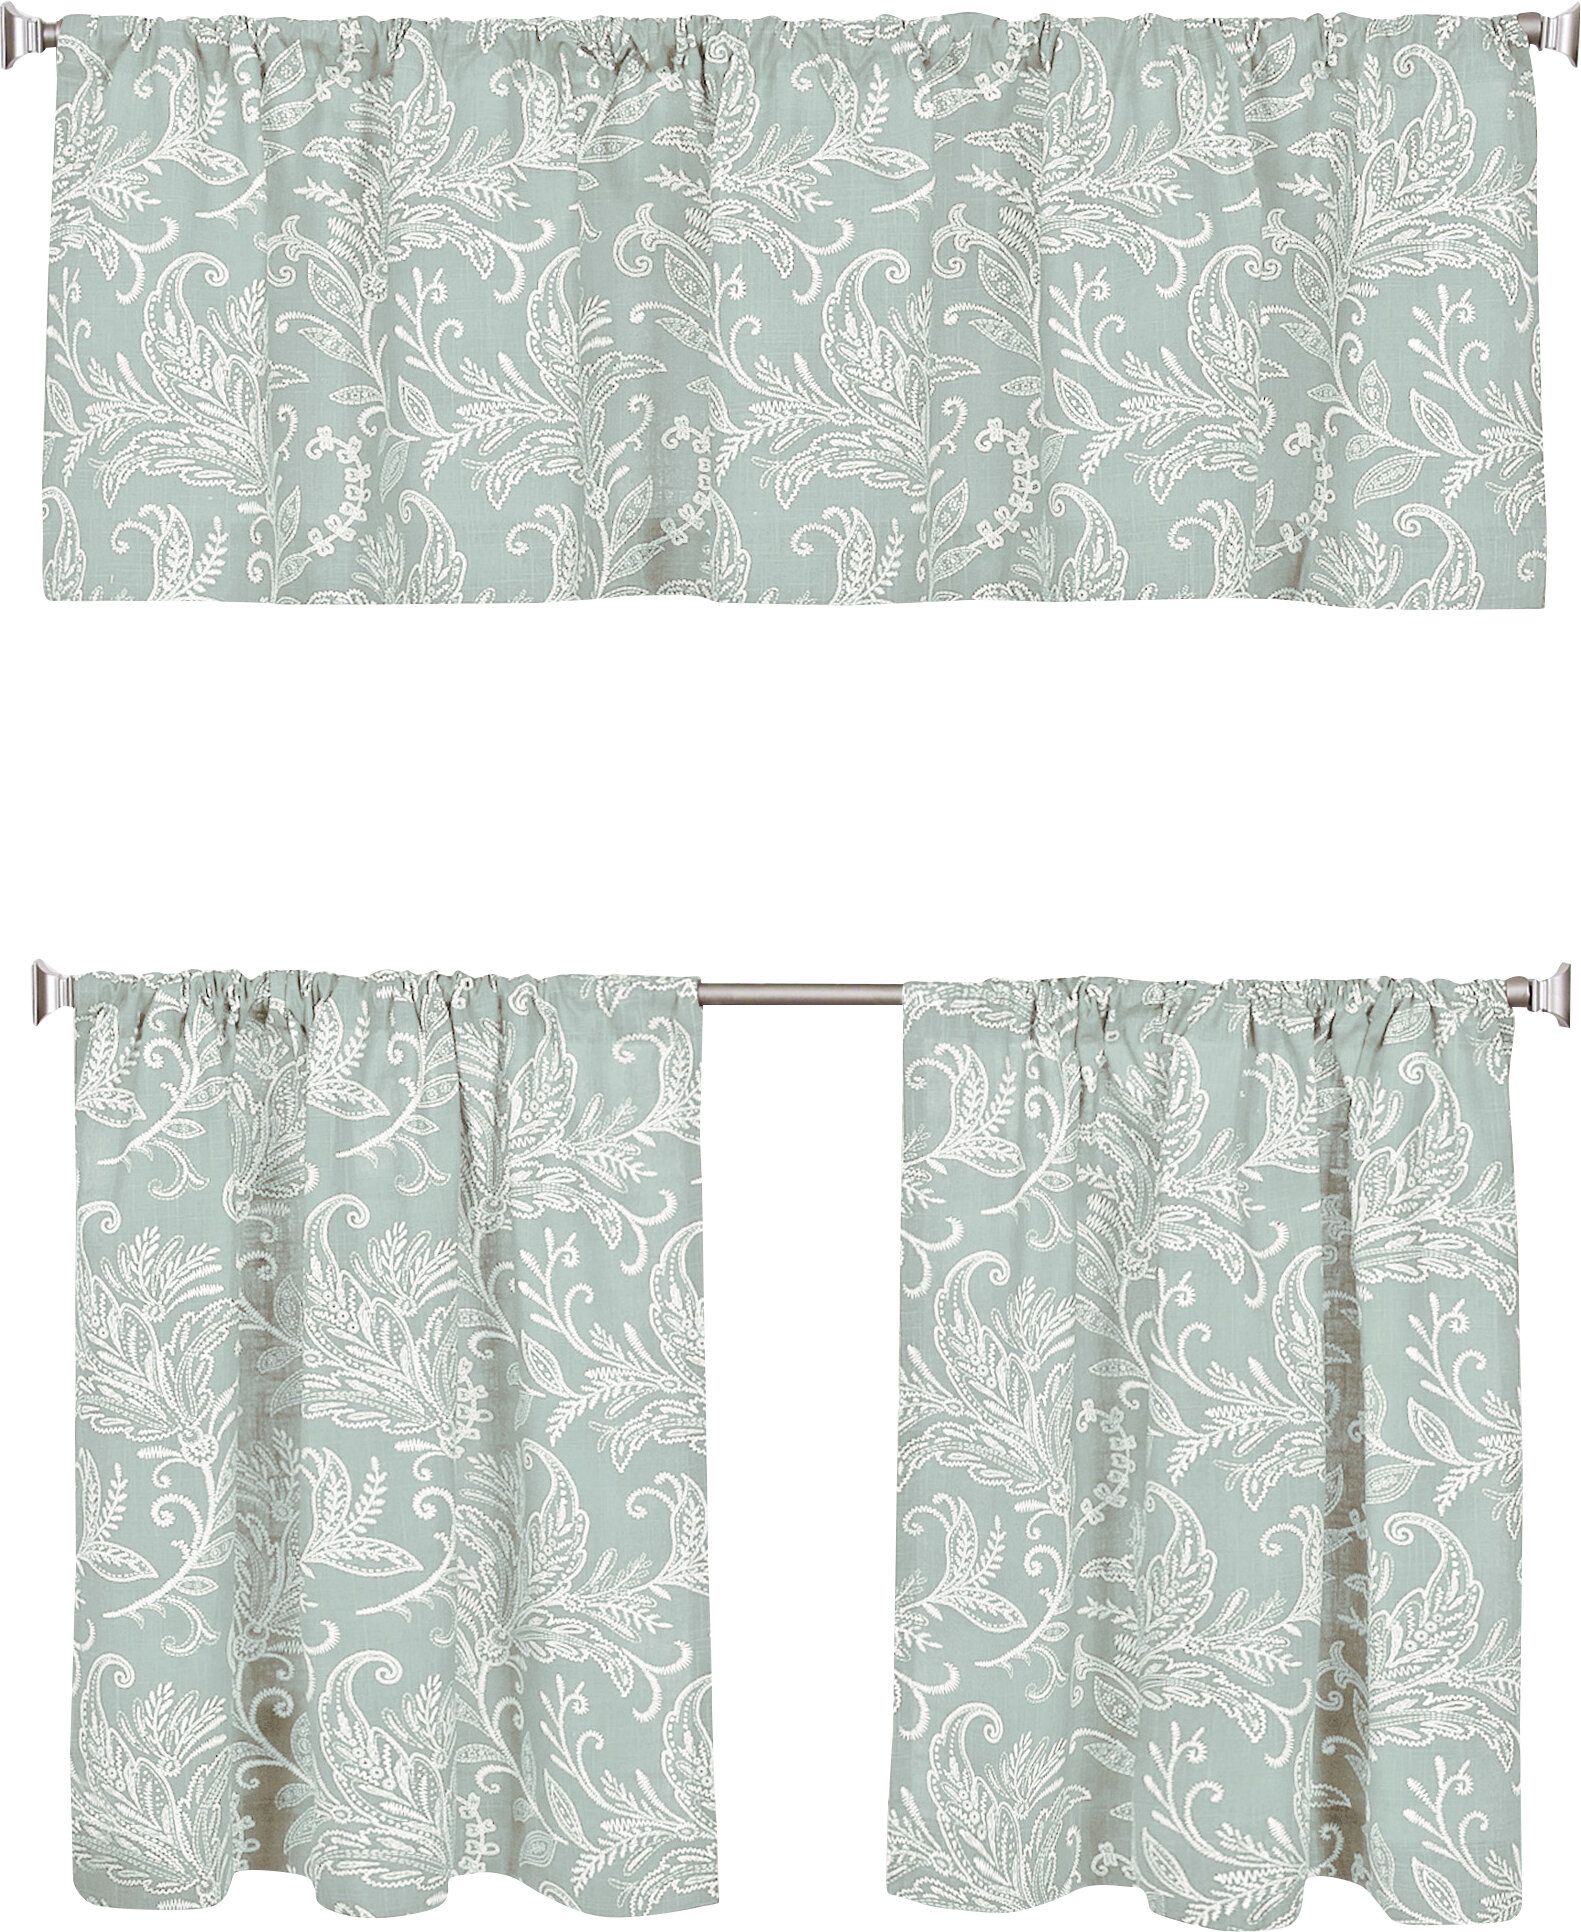 Elrene Home Fashions Flora Kitchen Tier Set & Reviews | Wayfair Pertaining To Imperial Flower Jacquard Tier And Valance Kitchen Curtain Sets (View 14 of 20)